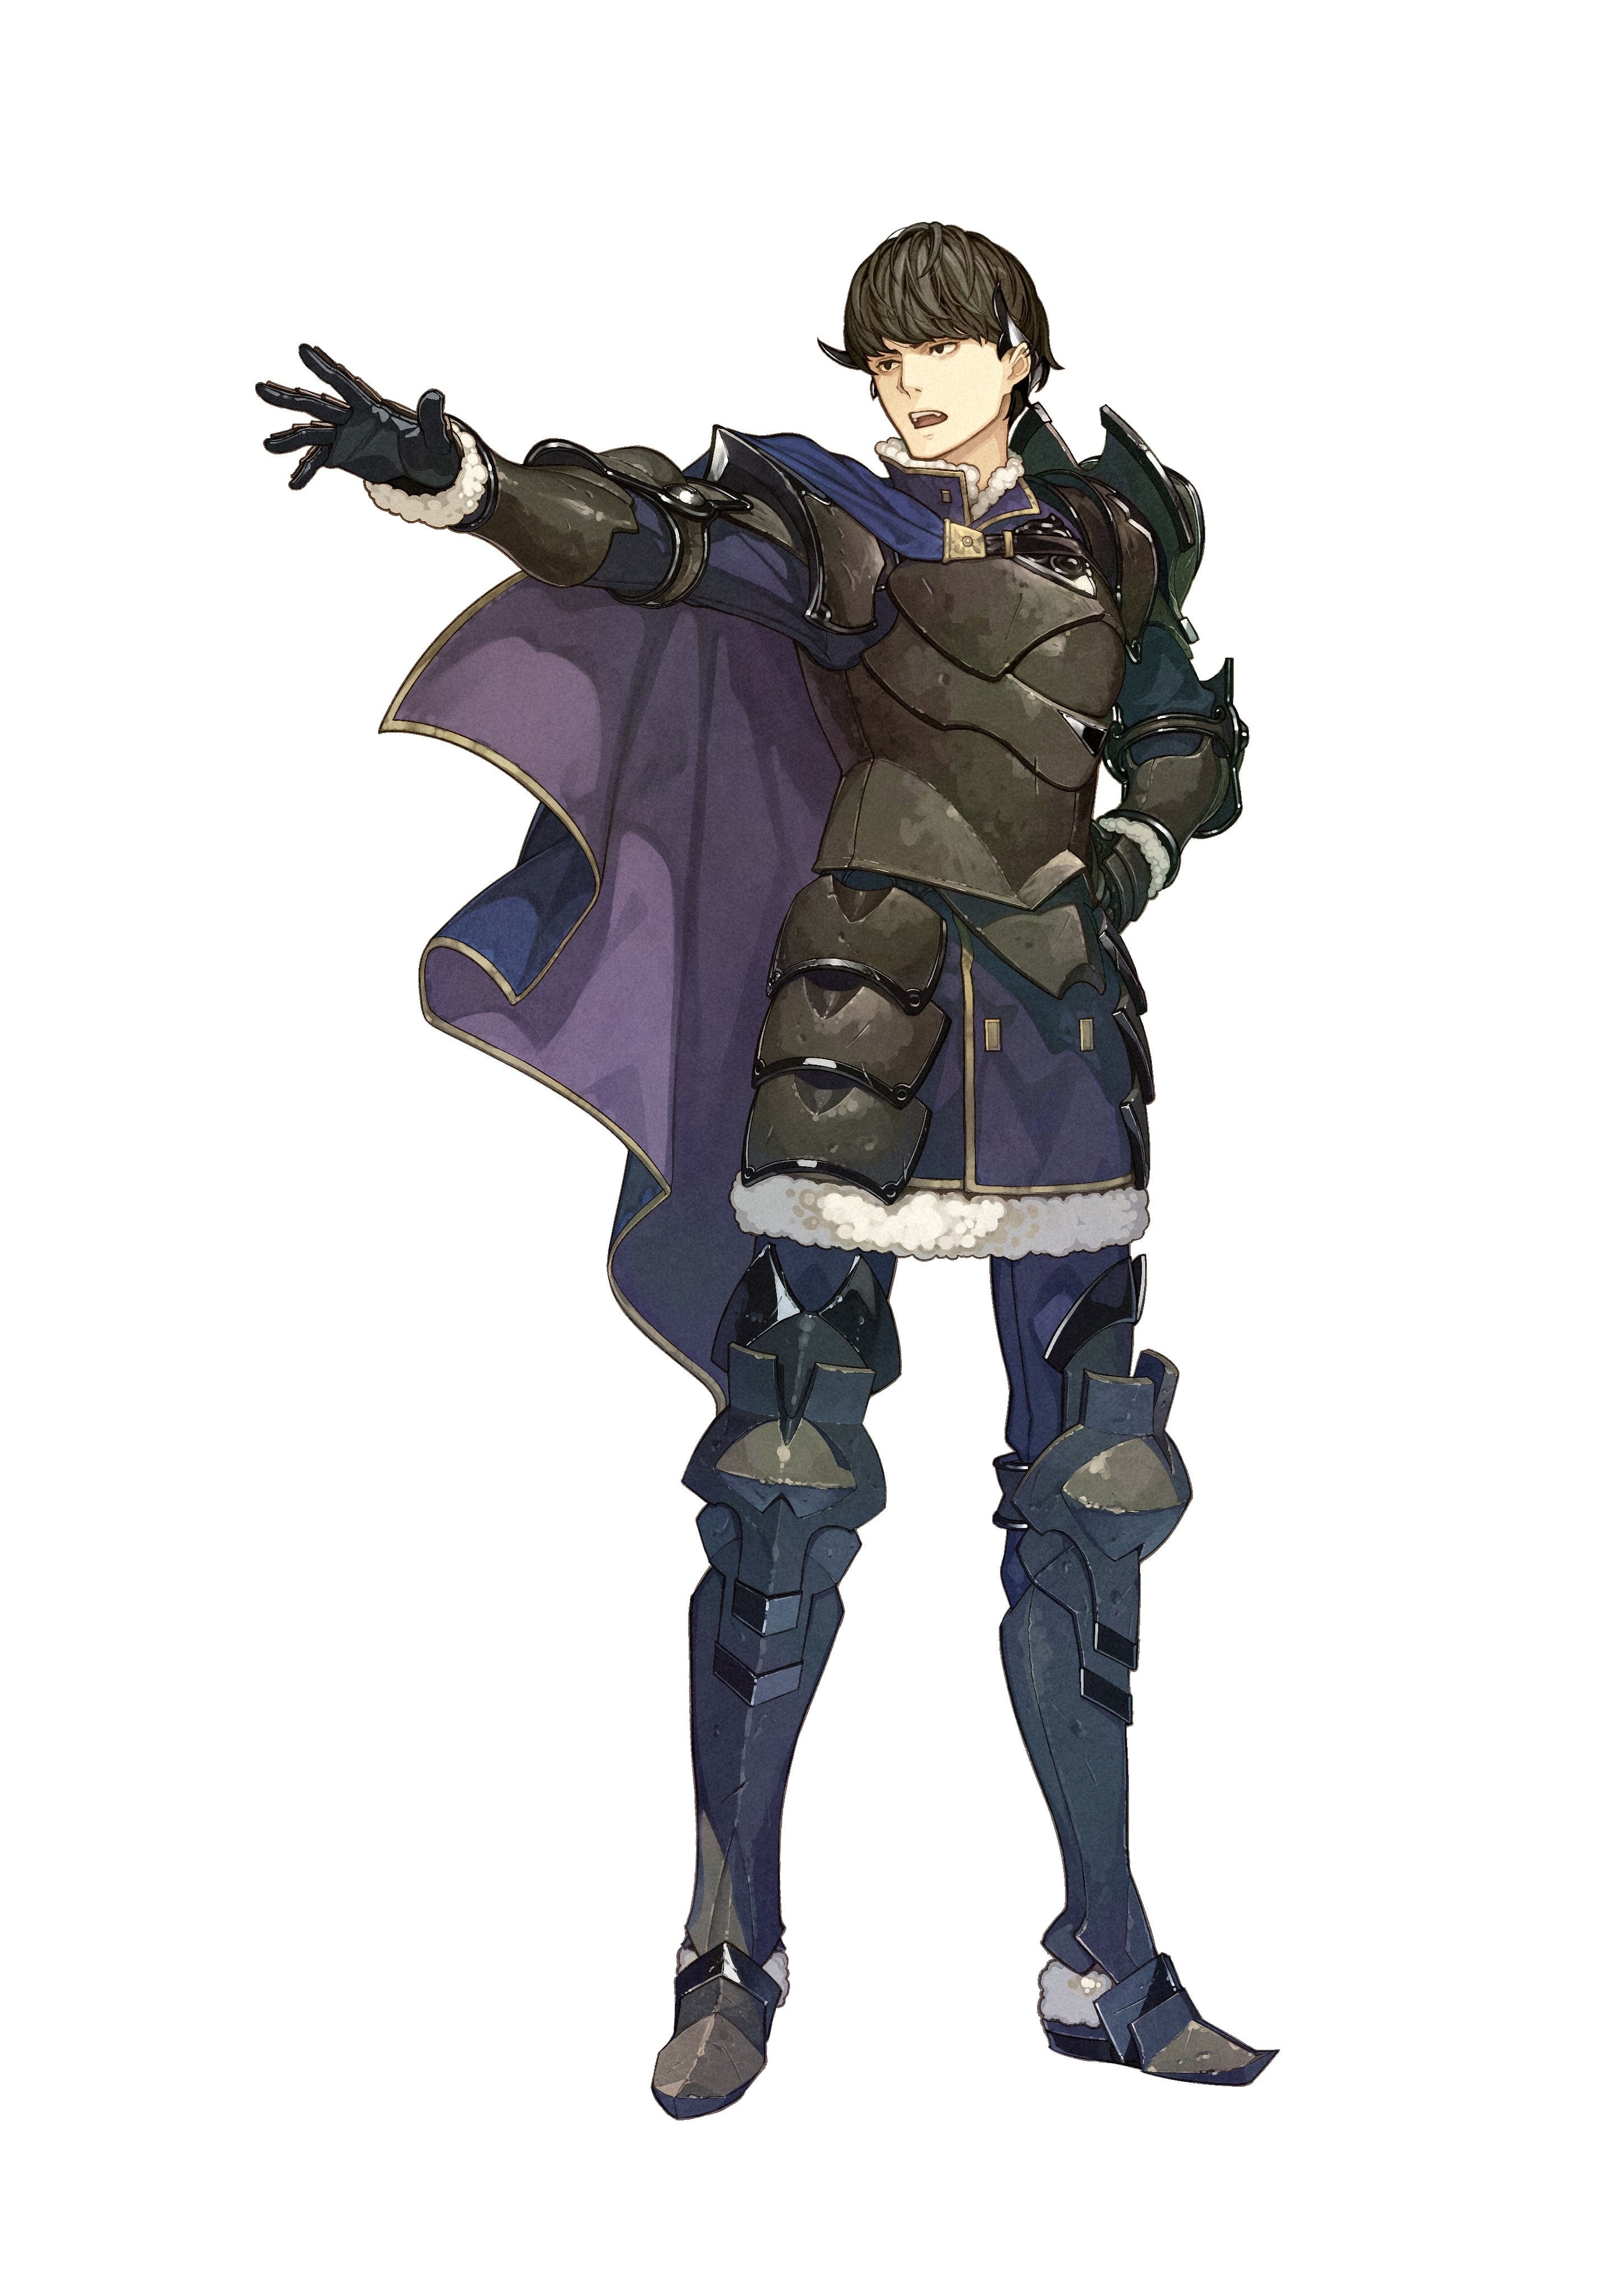 Fire Emblem Echoes: Shadows of Valentia - various pieces of character art